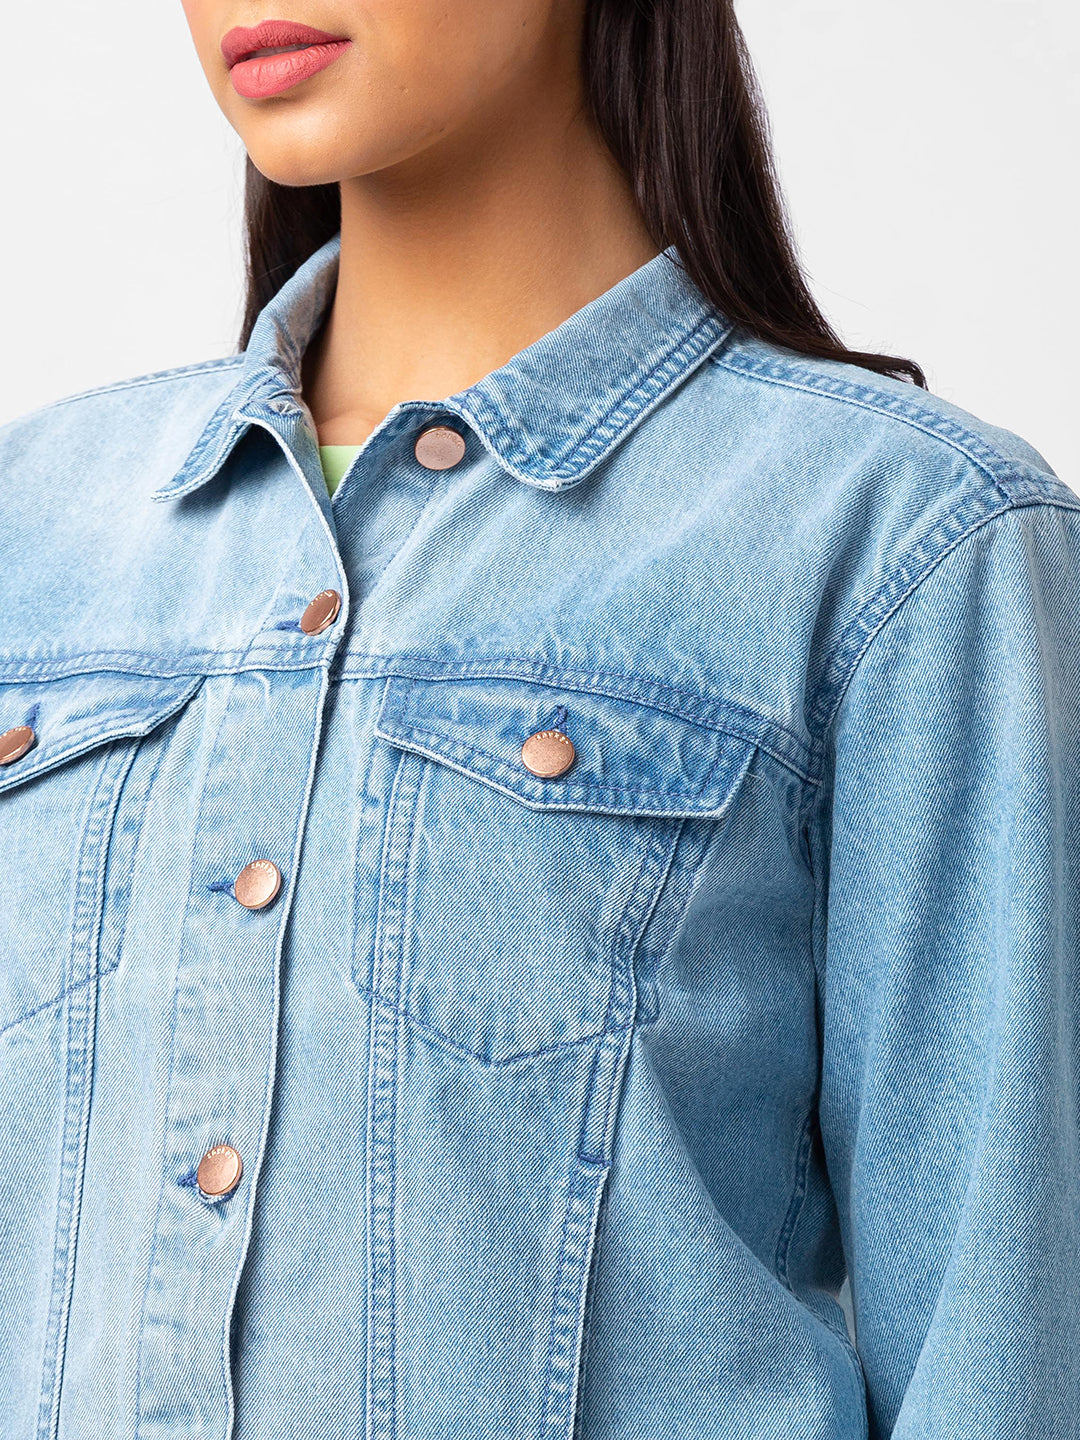 How To Style A Denim Jacket: Trends For 2023 | Jean jacket outfits, Jean  jacket outfits fall, Jean jacket outfits summer